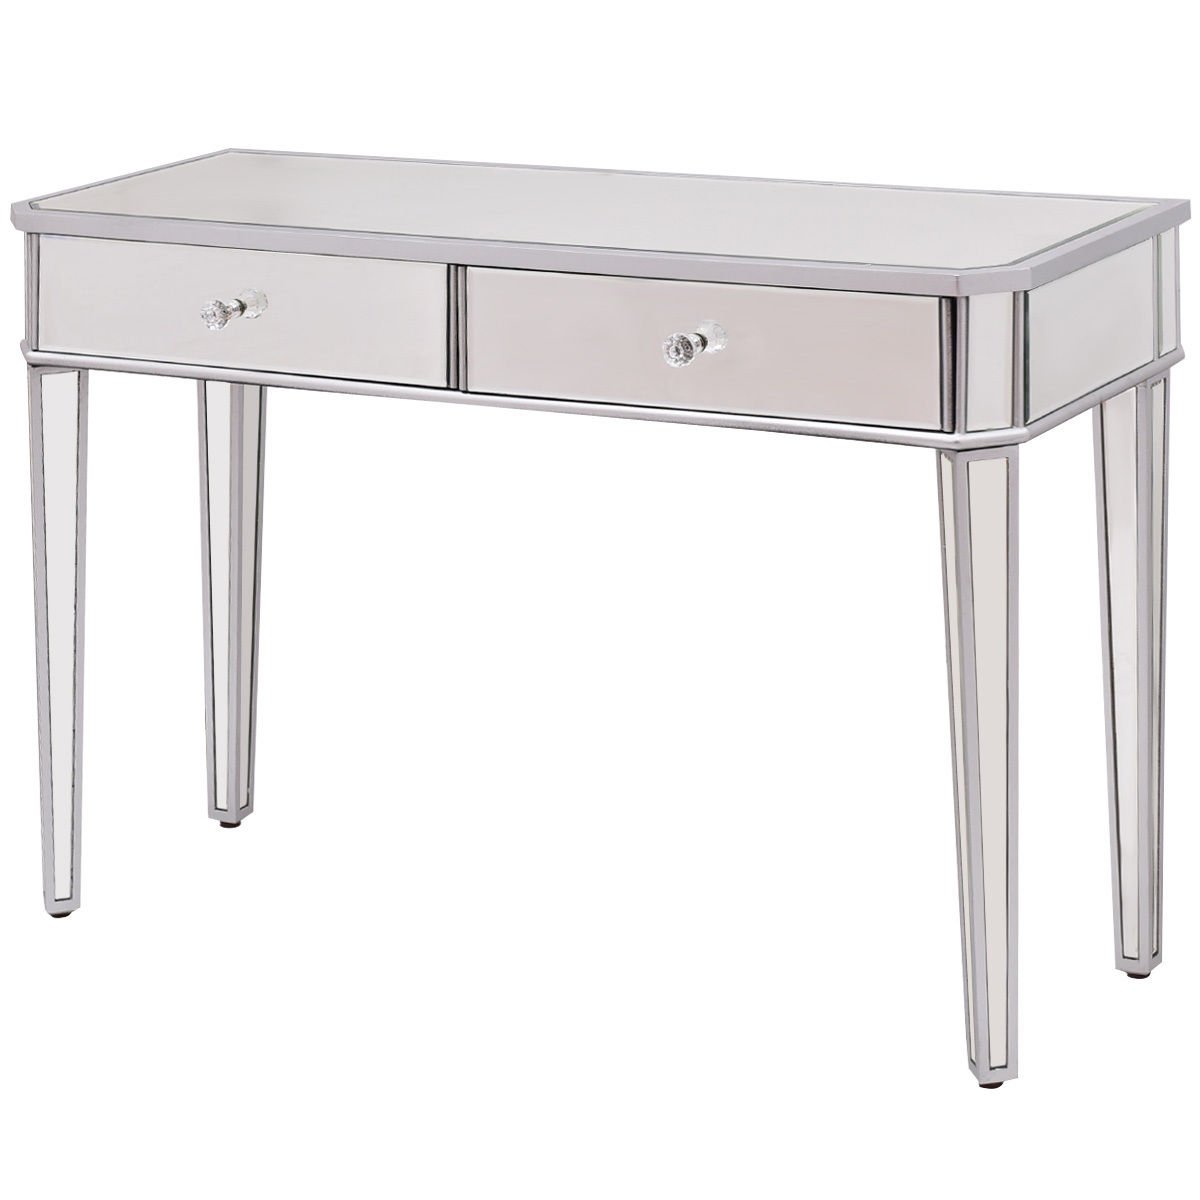 drawer mirrored vanity make desk console dressing accent table with silver glass modern for storage kitchen dining room essentials rest pillow iron furniture adjustable hairpin